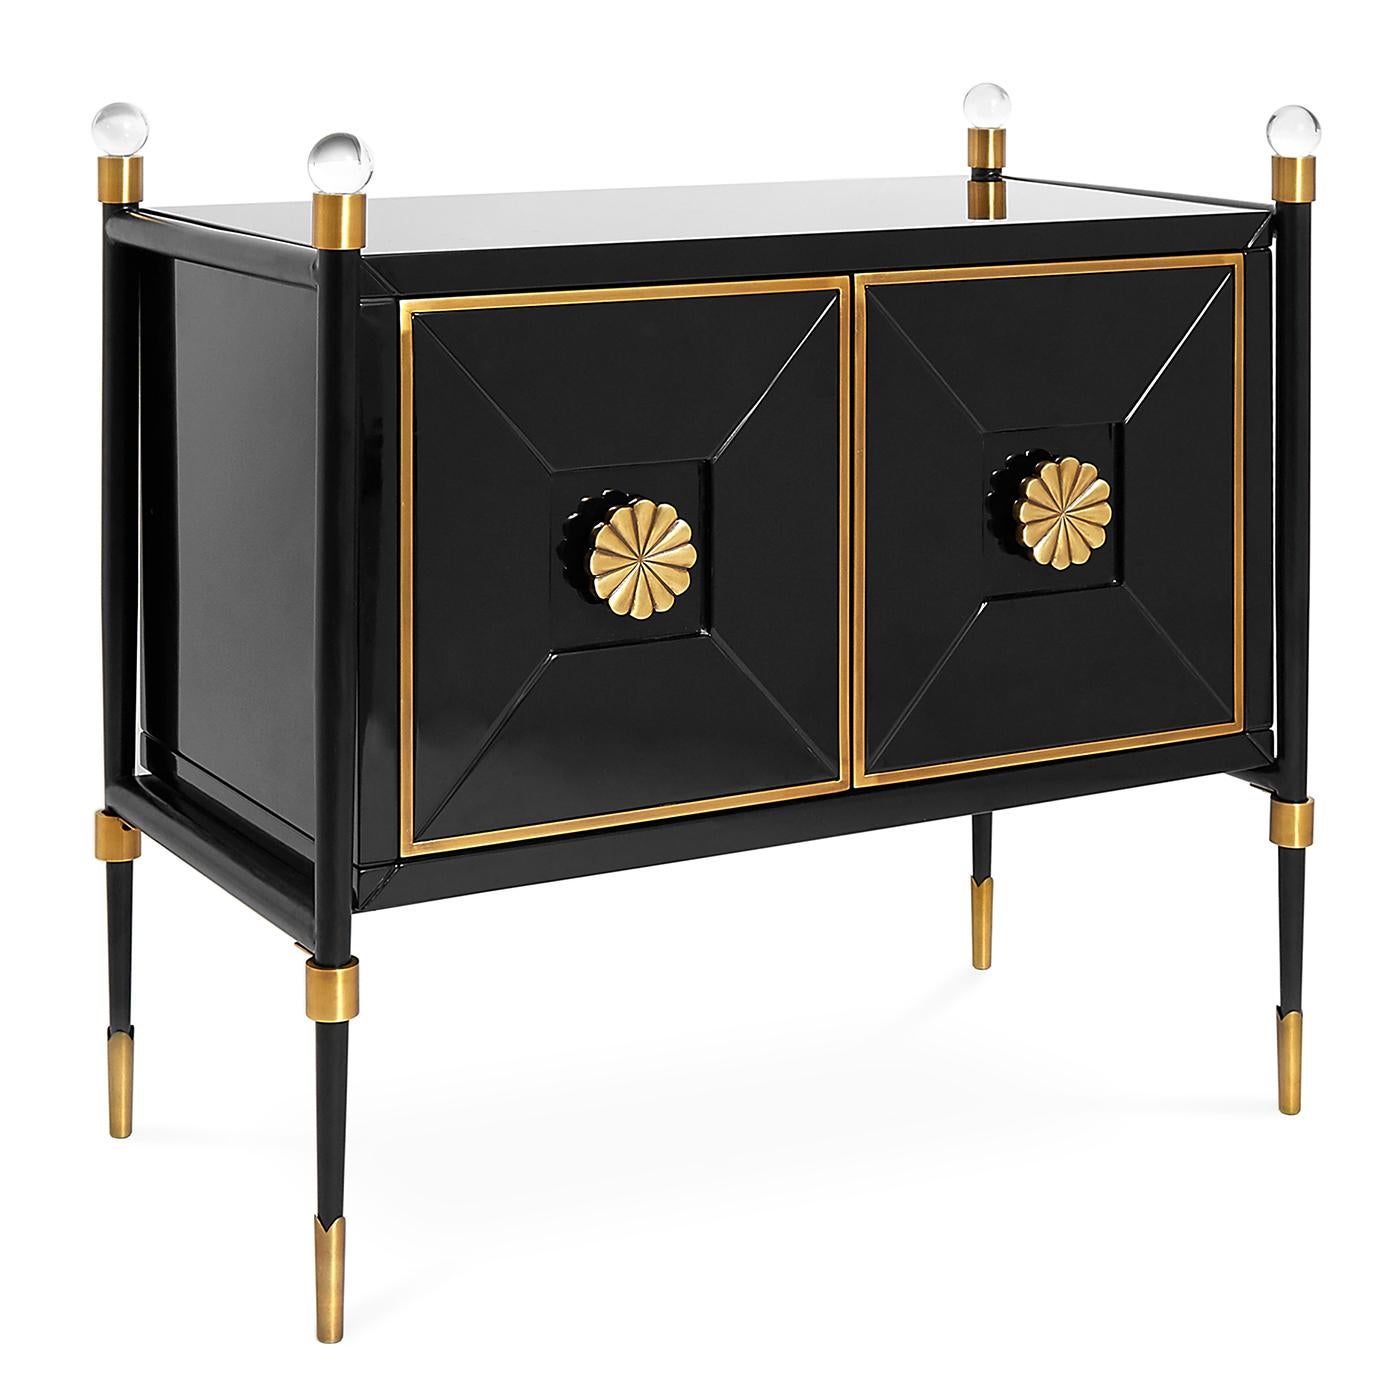 Parisian flair. Our rider small cabinet is an updated take on French Empire style. Glossy black lacquer with antiqued brass accents and dramatic acrylic finials exude modern glamour. The leggy base makes this hardworking piece feel light and lively.